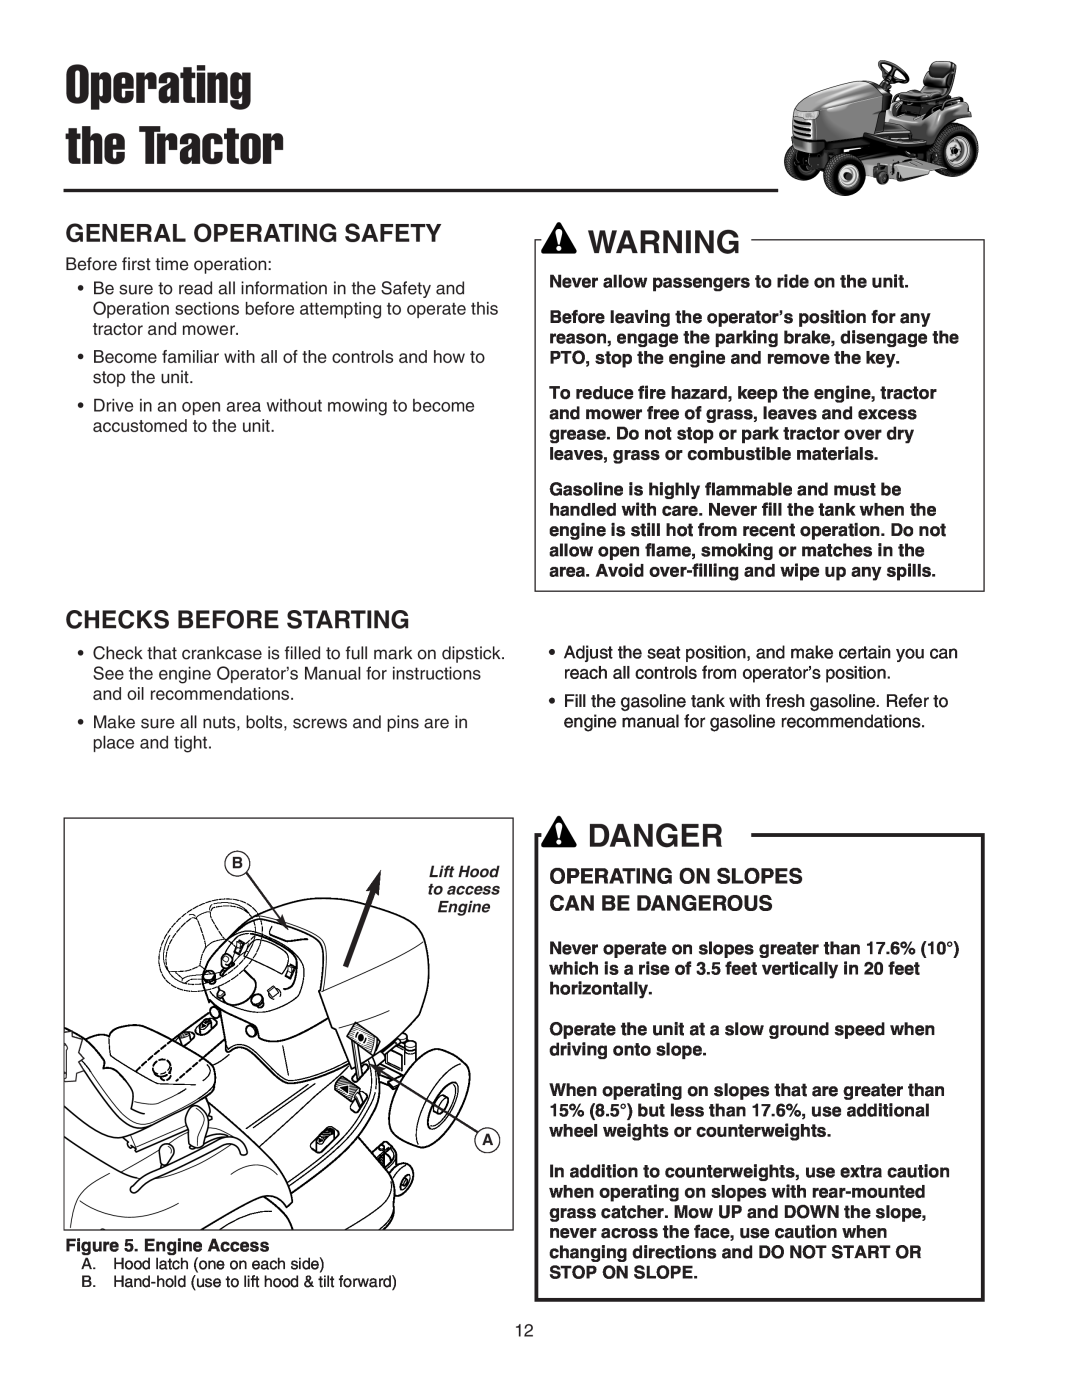 Simplicity 1693118, 1693738 Operating the Tractor, Danger, General Operating Safety, Checks Before Starting, Engine Access 